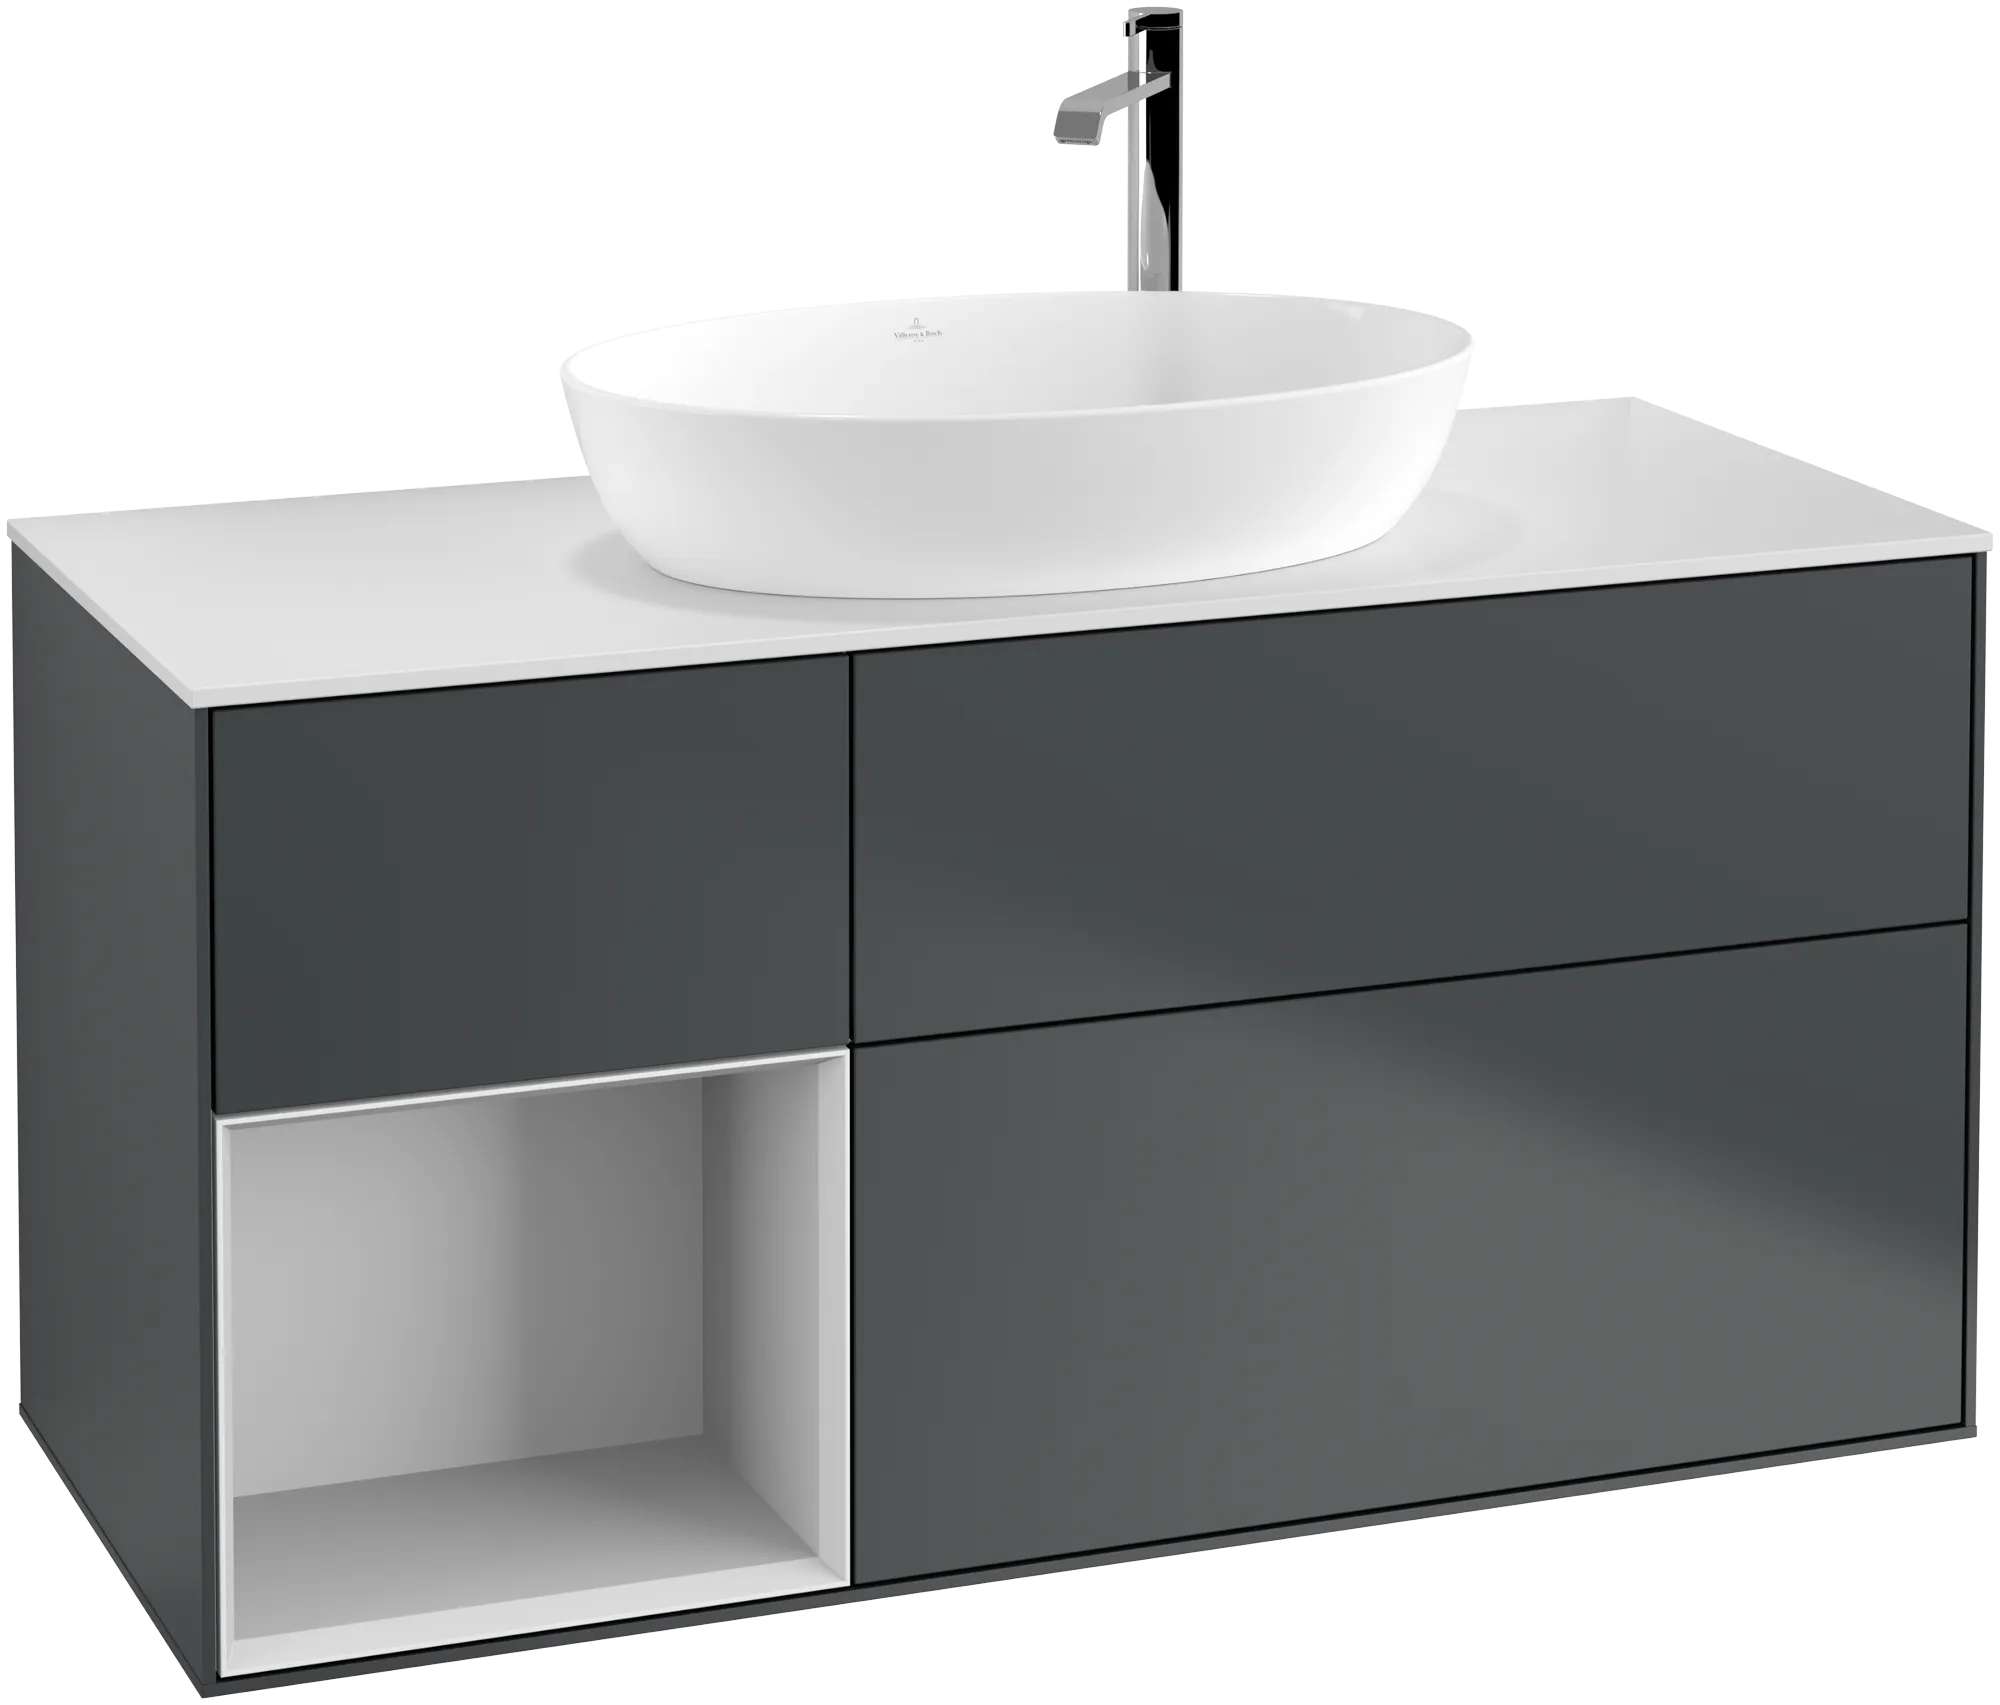 Picture of VILLEROY BOCH Finion Vanity unit, with lighting, 3 pull-out compartments, 1200 x 603 x 501 mm, Midnight Blue Matt Lacquer / White Matt Lacquer / Glass White Matt #G941MTHG